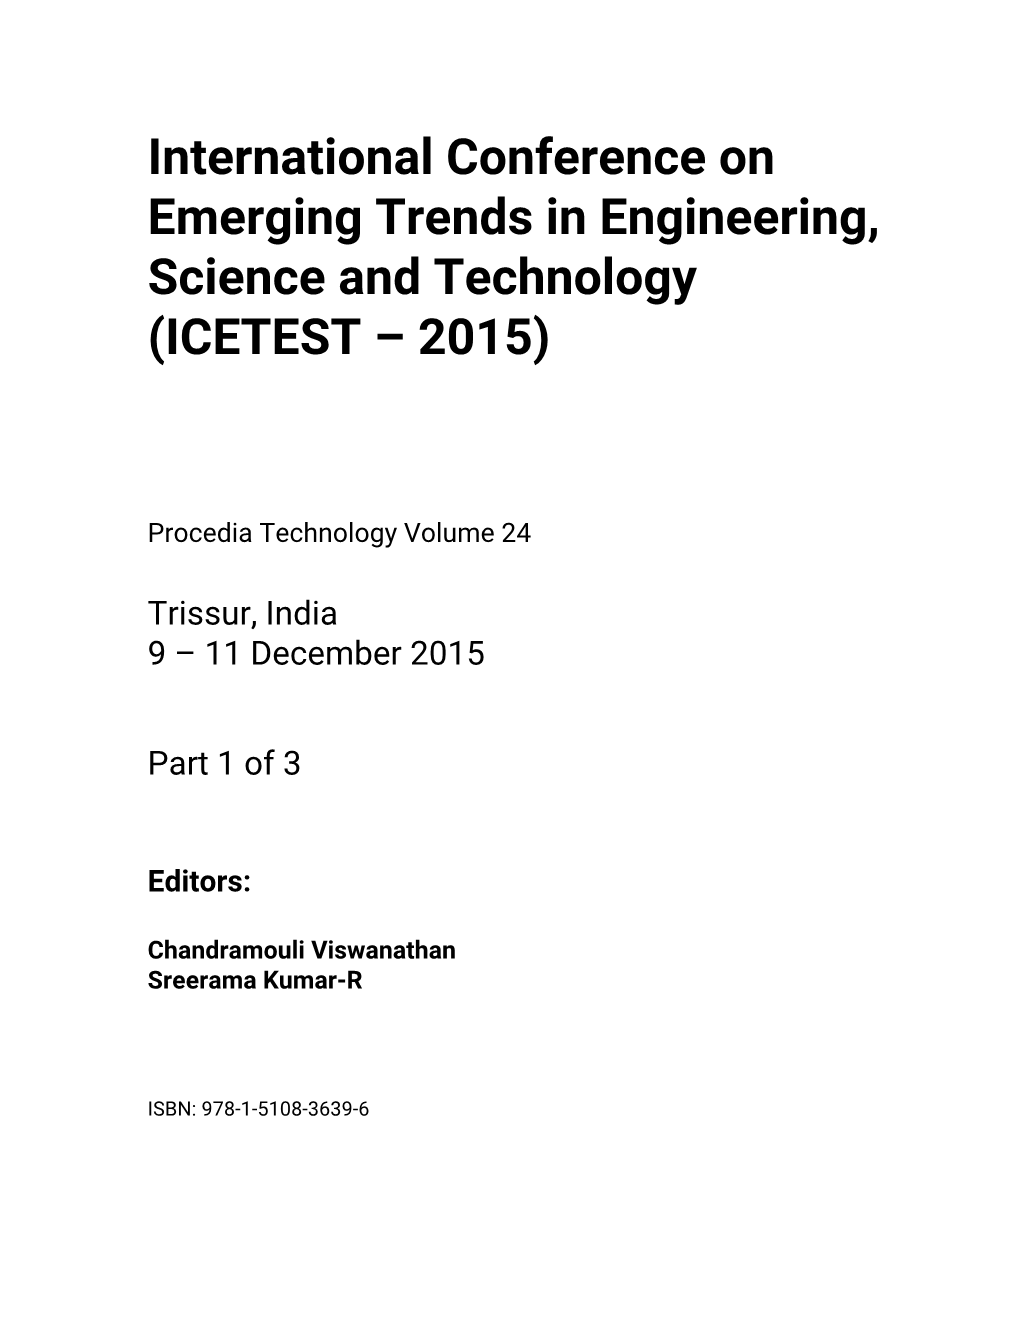 International Conference on Emerging Trends in Engineering, Science